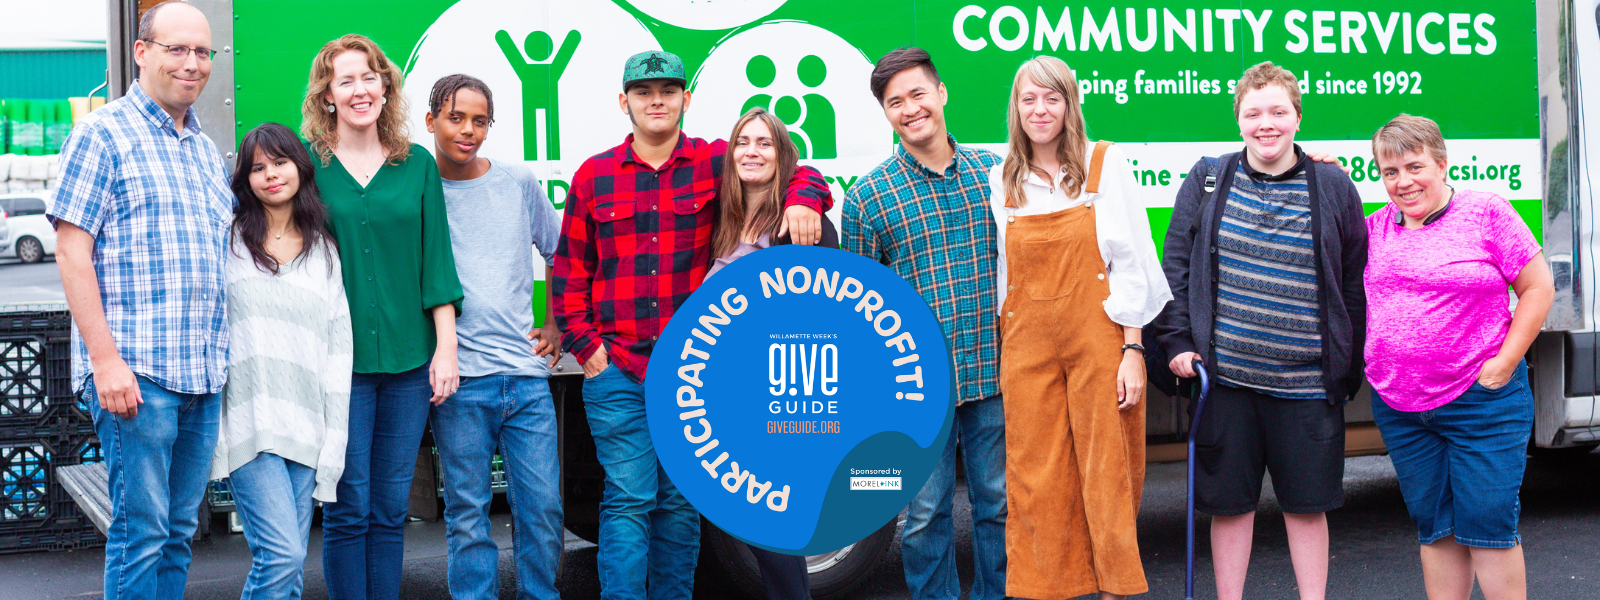 Birch participant families standing in front of the Birch box truck. From left to right: man with glasses wearing button up plaid shirt and jeans, teen girl wearing white sweater and jeans, woman in green blouse and jeans, teen boy in grey top and jeans, teen boy in plaid shirt and jeans wearing hat, woman in yoga pants and purple top with jacket, man in button up top and jeans, woman in white blouse and burnt orange jumper, teen girl in striped shirt with jacket and shorts using a cane, woman in pink top and shorts